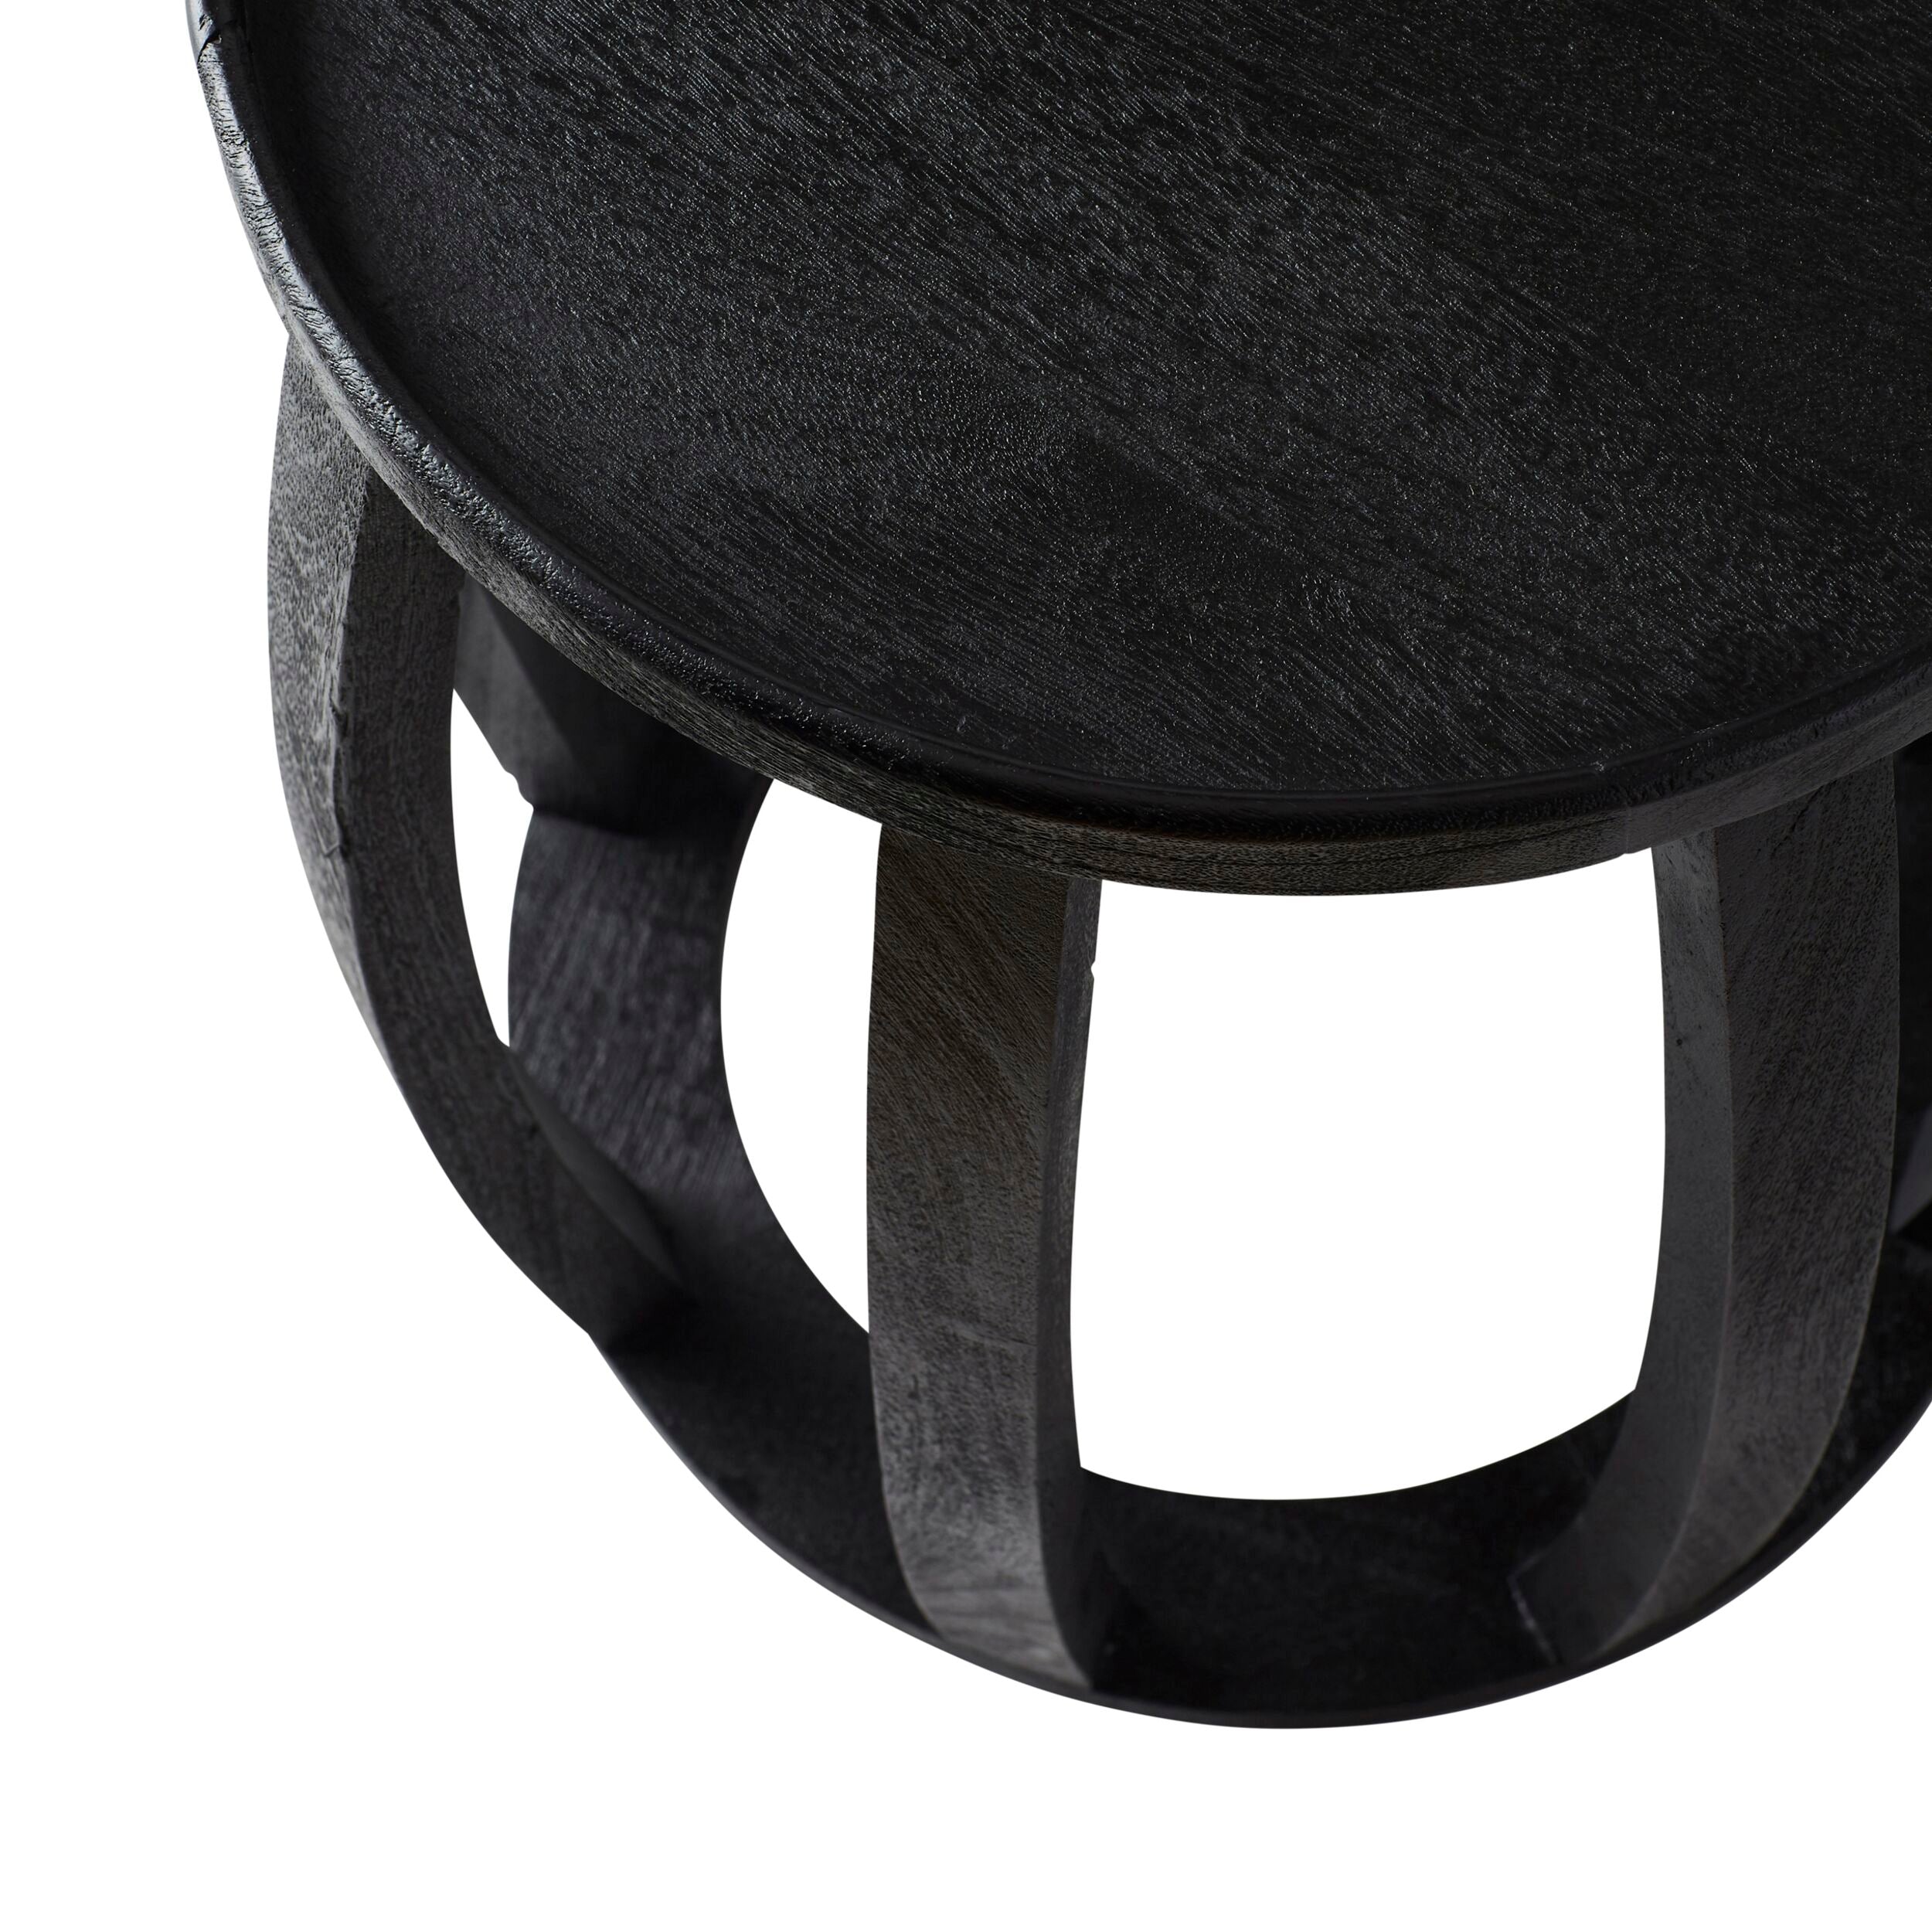 Ink Round Side Table Black